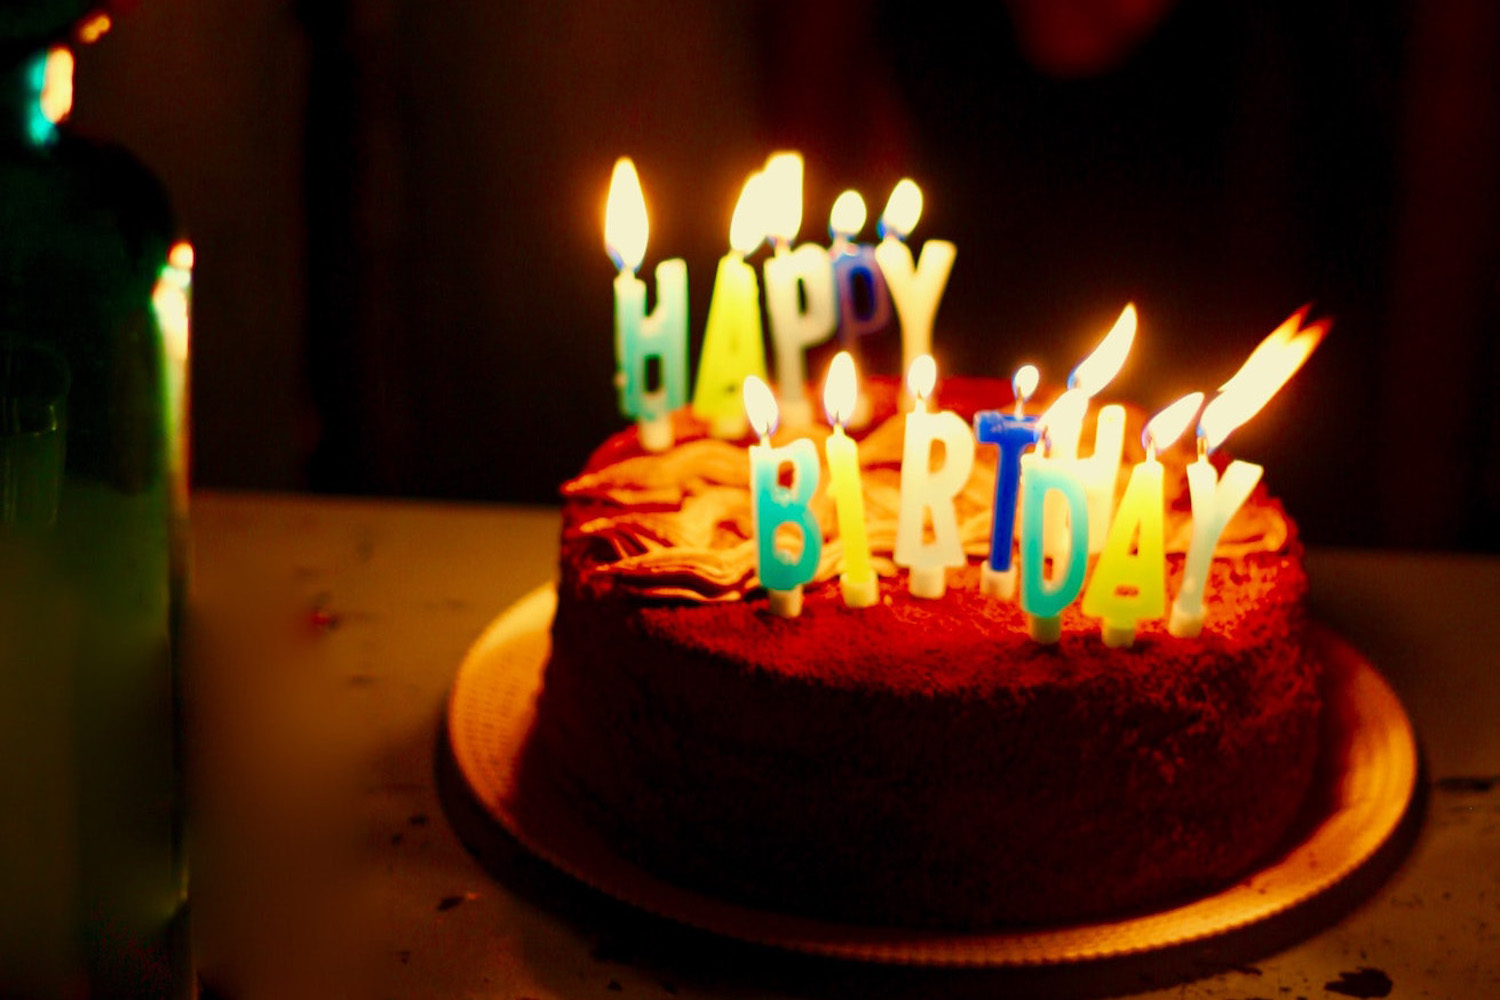 A birthday cake with lighted candles